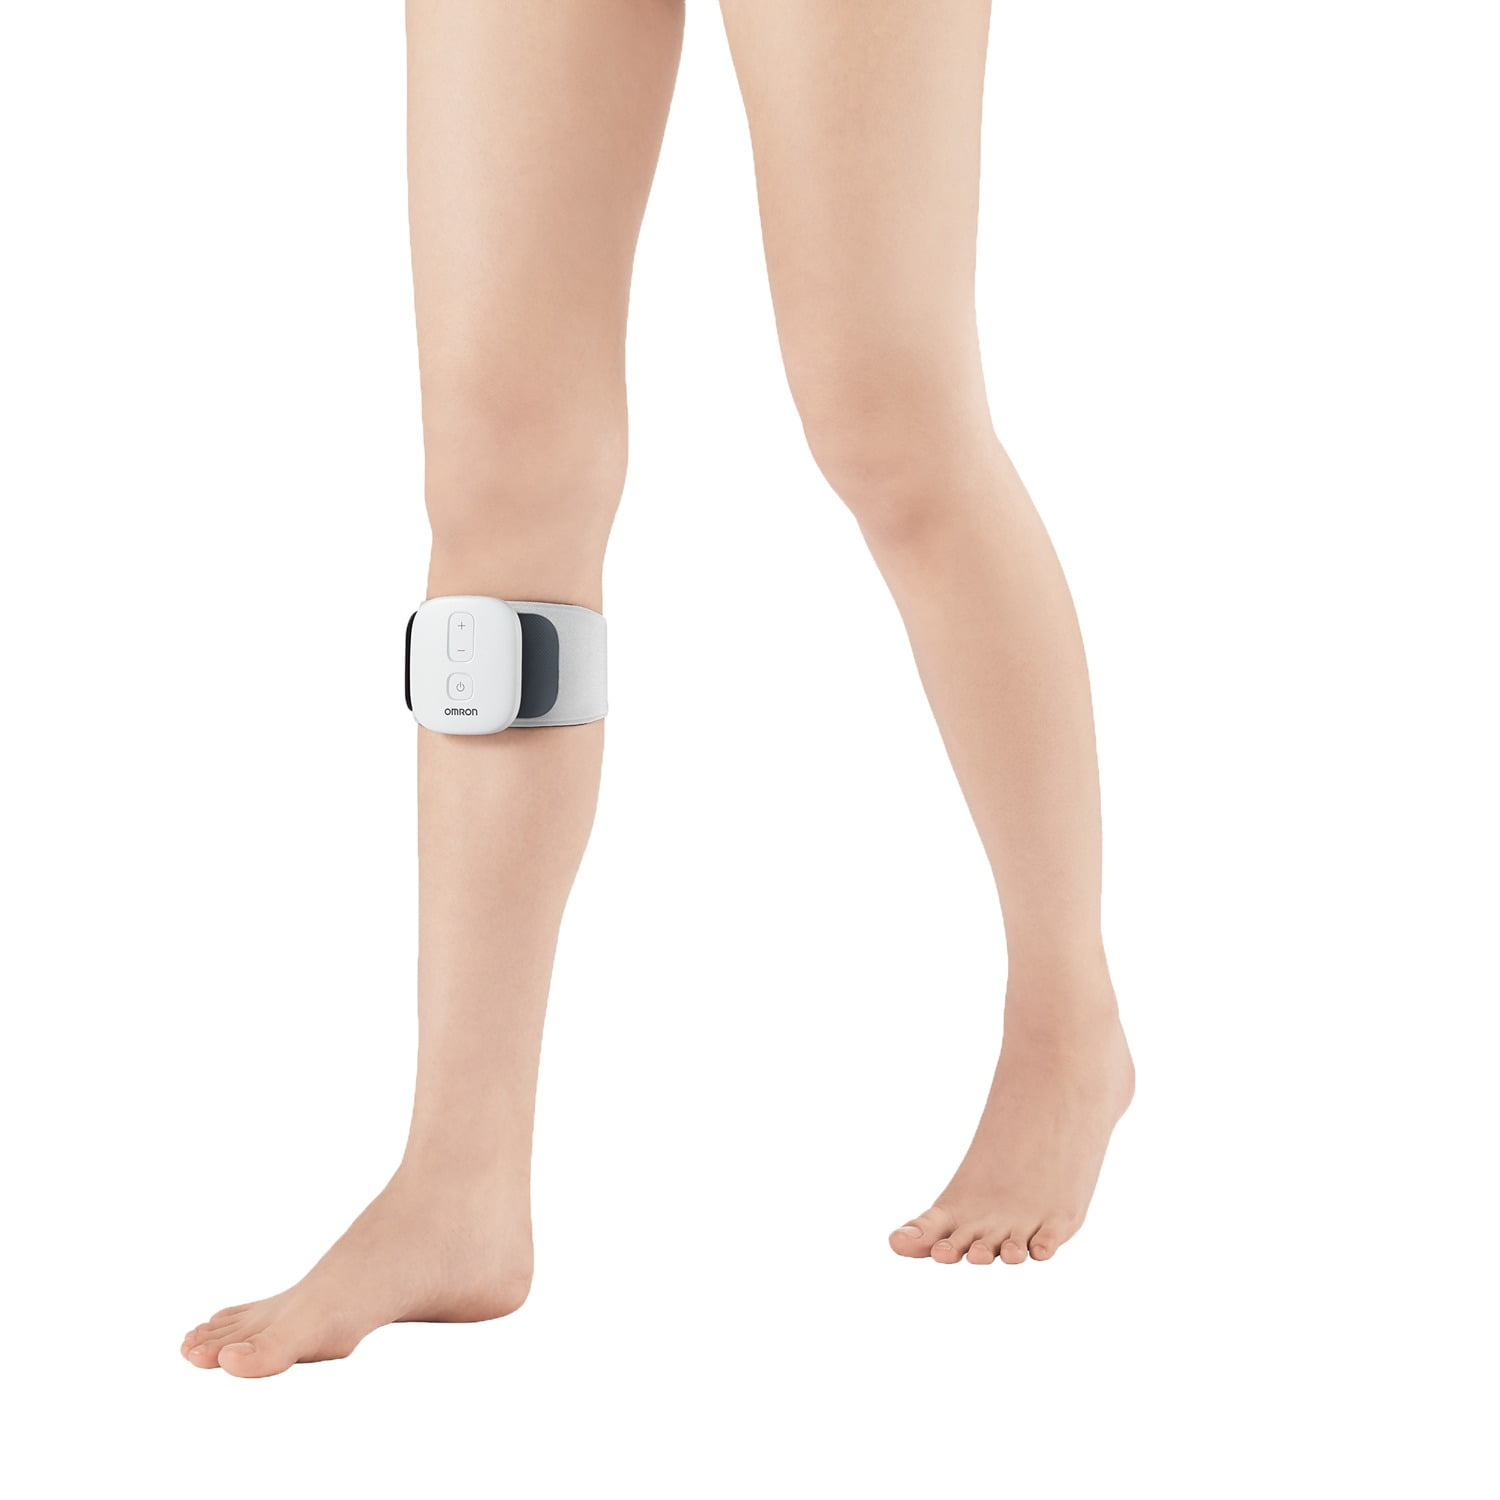 Omron® Focus™ TENS Therapy for Knee Wireless Muscle Stimulator